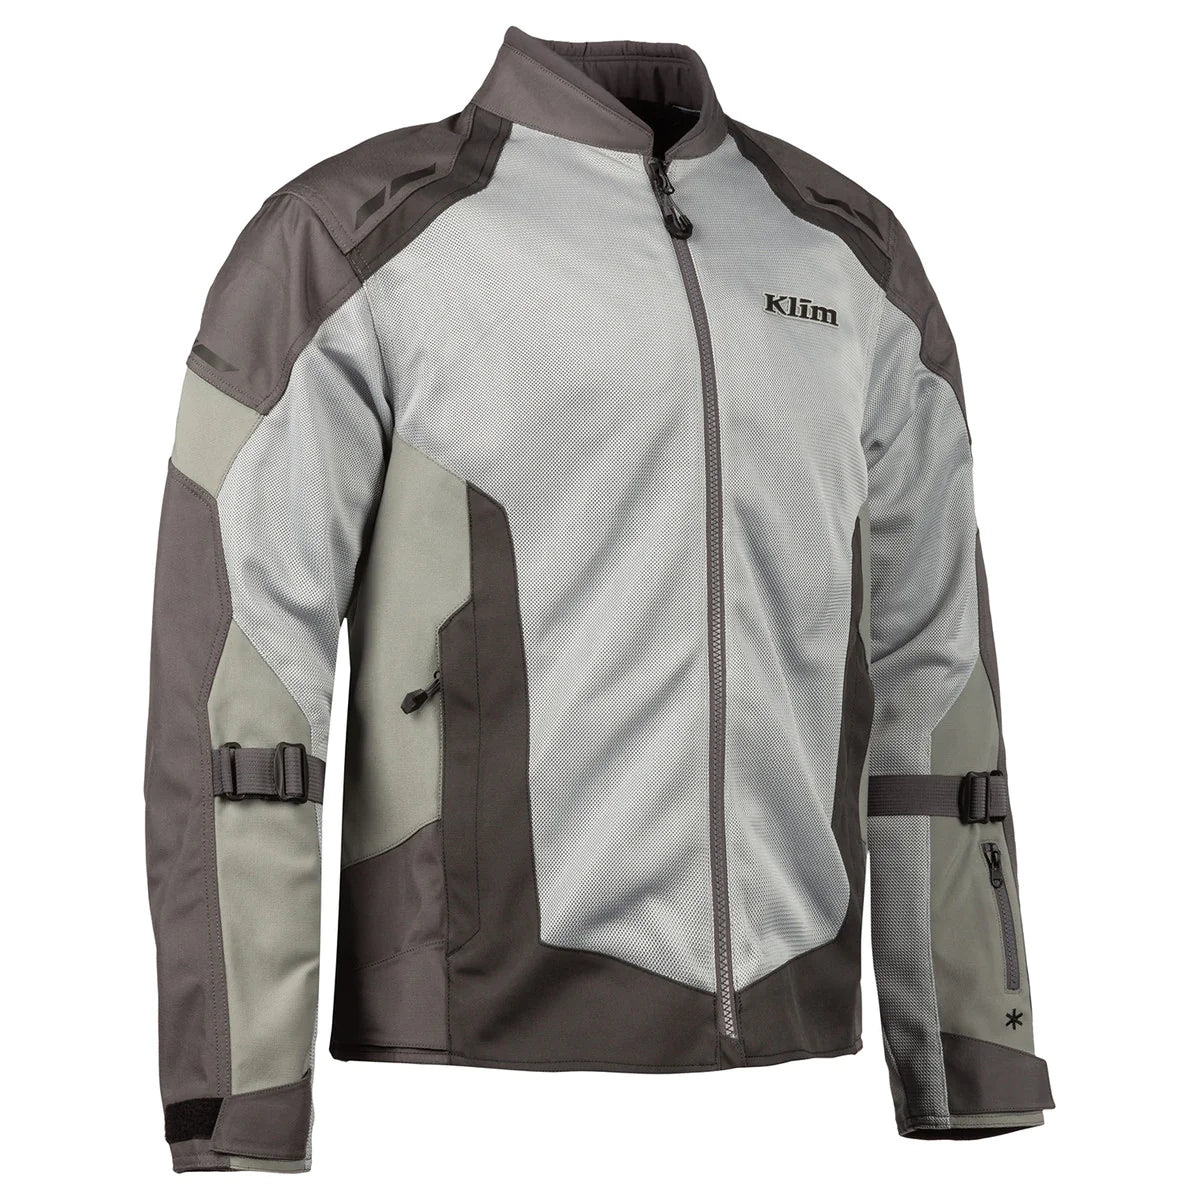 Klim Induction Cool Gray Jacket for motorcycle front side view